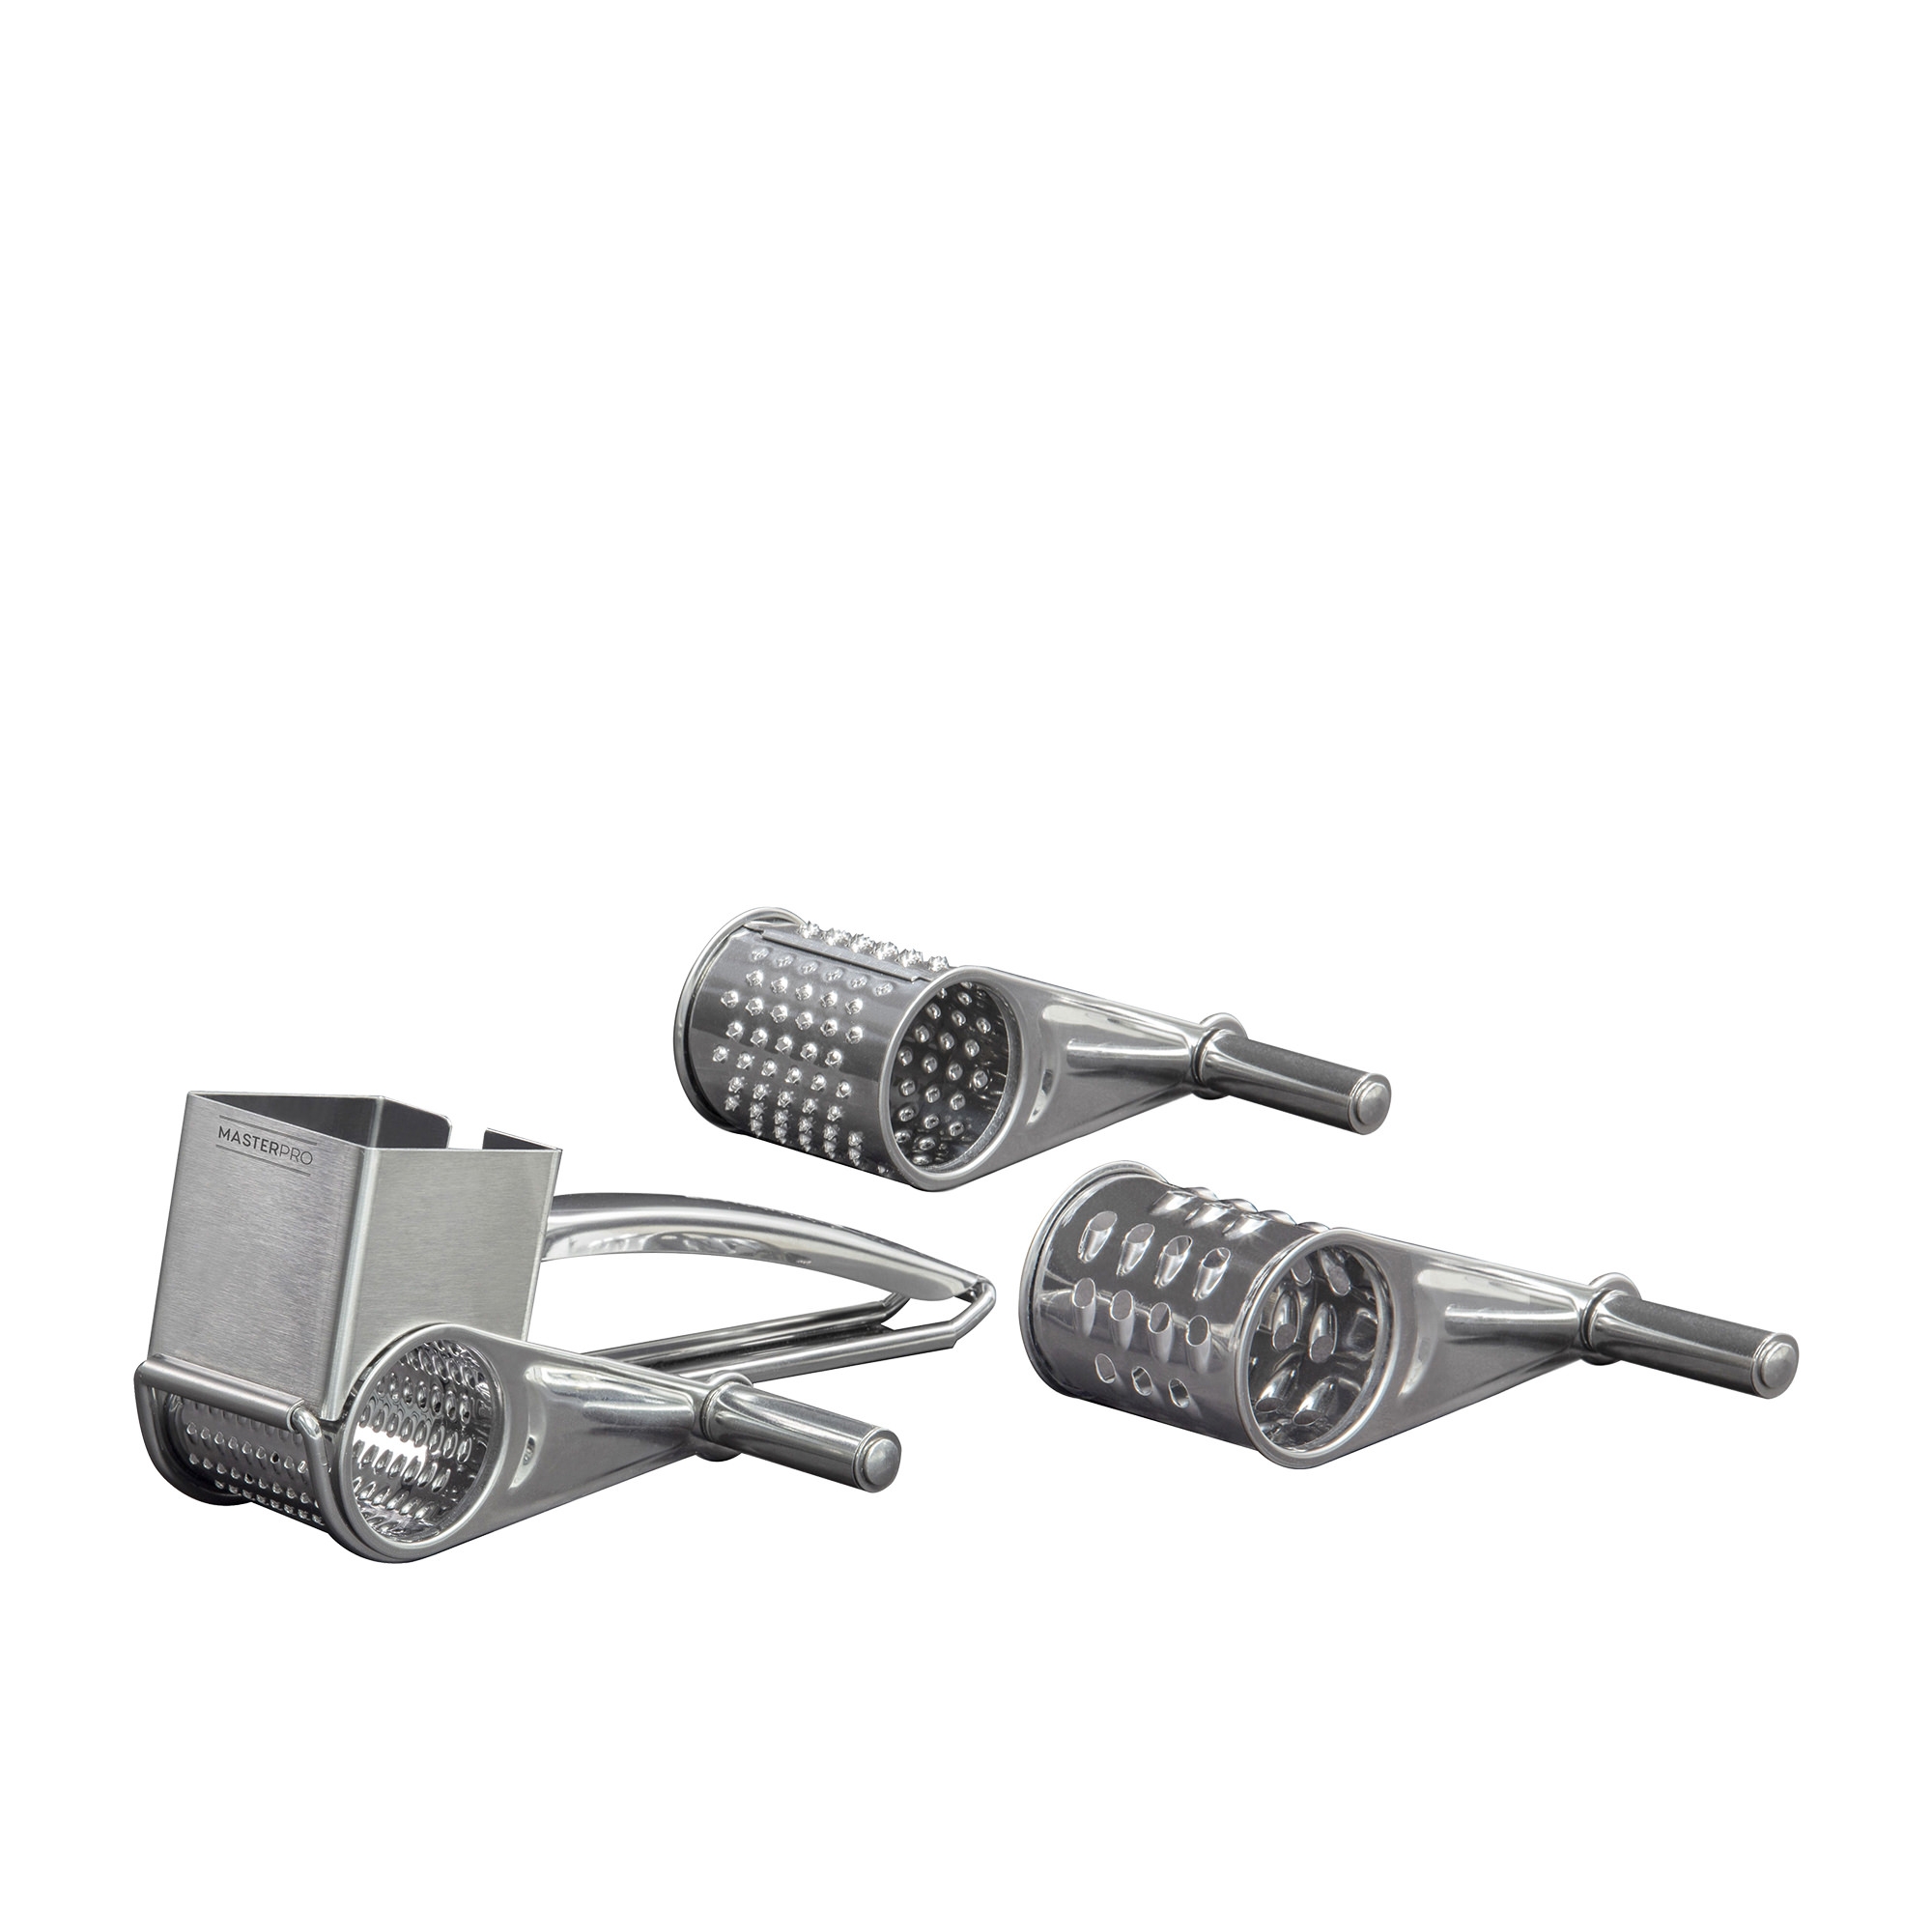 MasterPro Deluxe Rotary Grater with 3 Blades Image 1